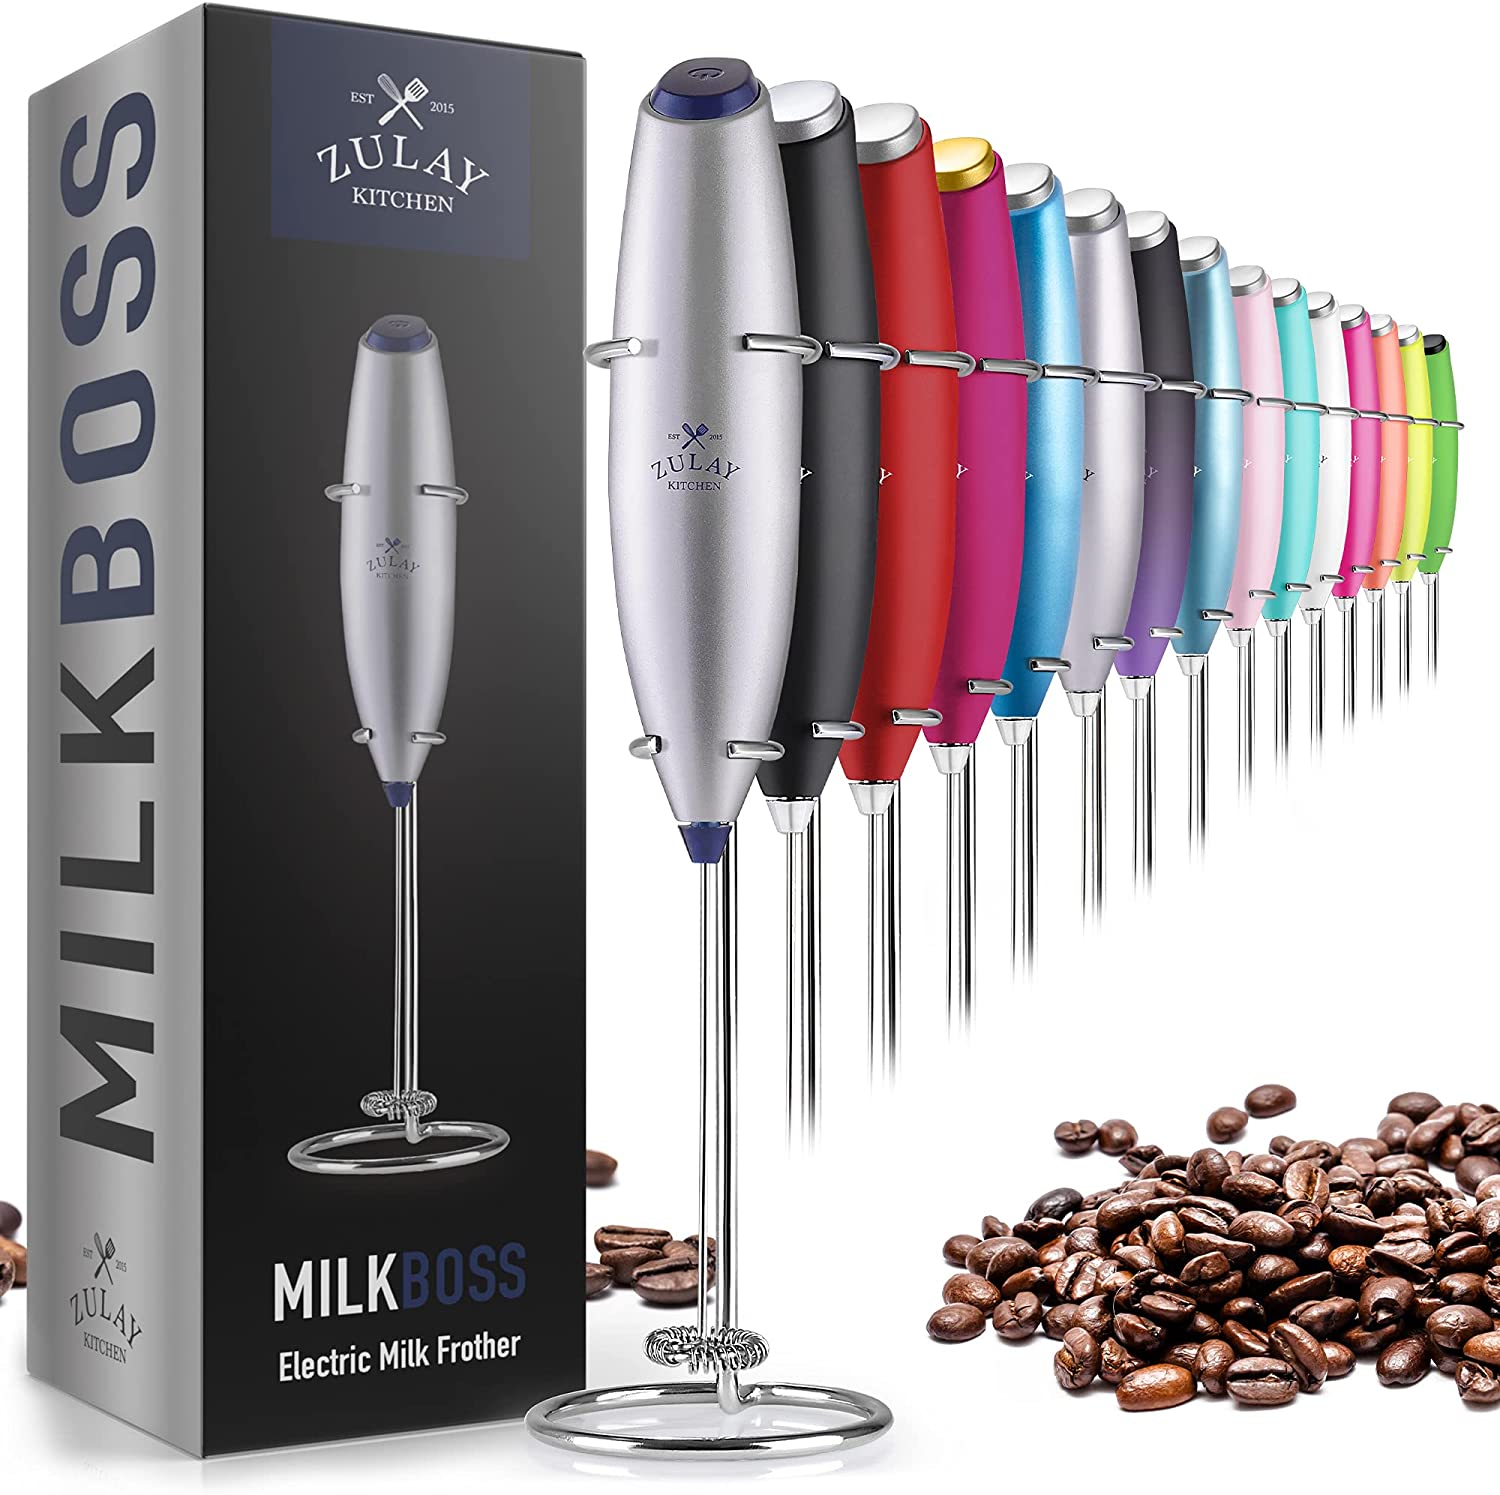 Classic Milk Frother With Stand - Zulay KitchenKitchen & DiningZulay Kitchen